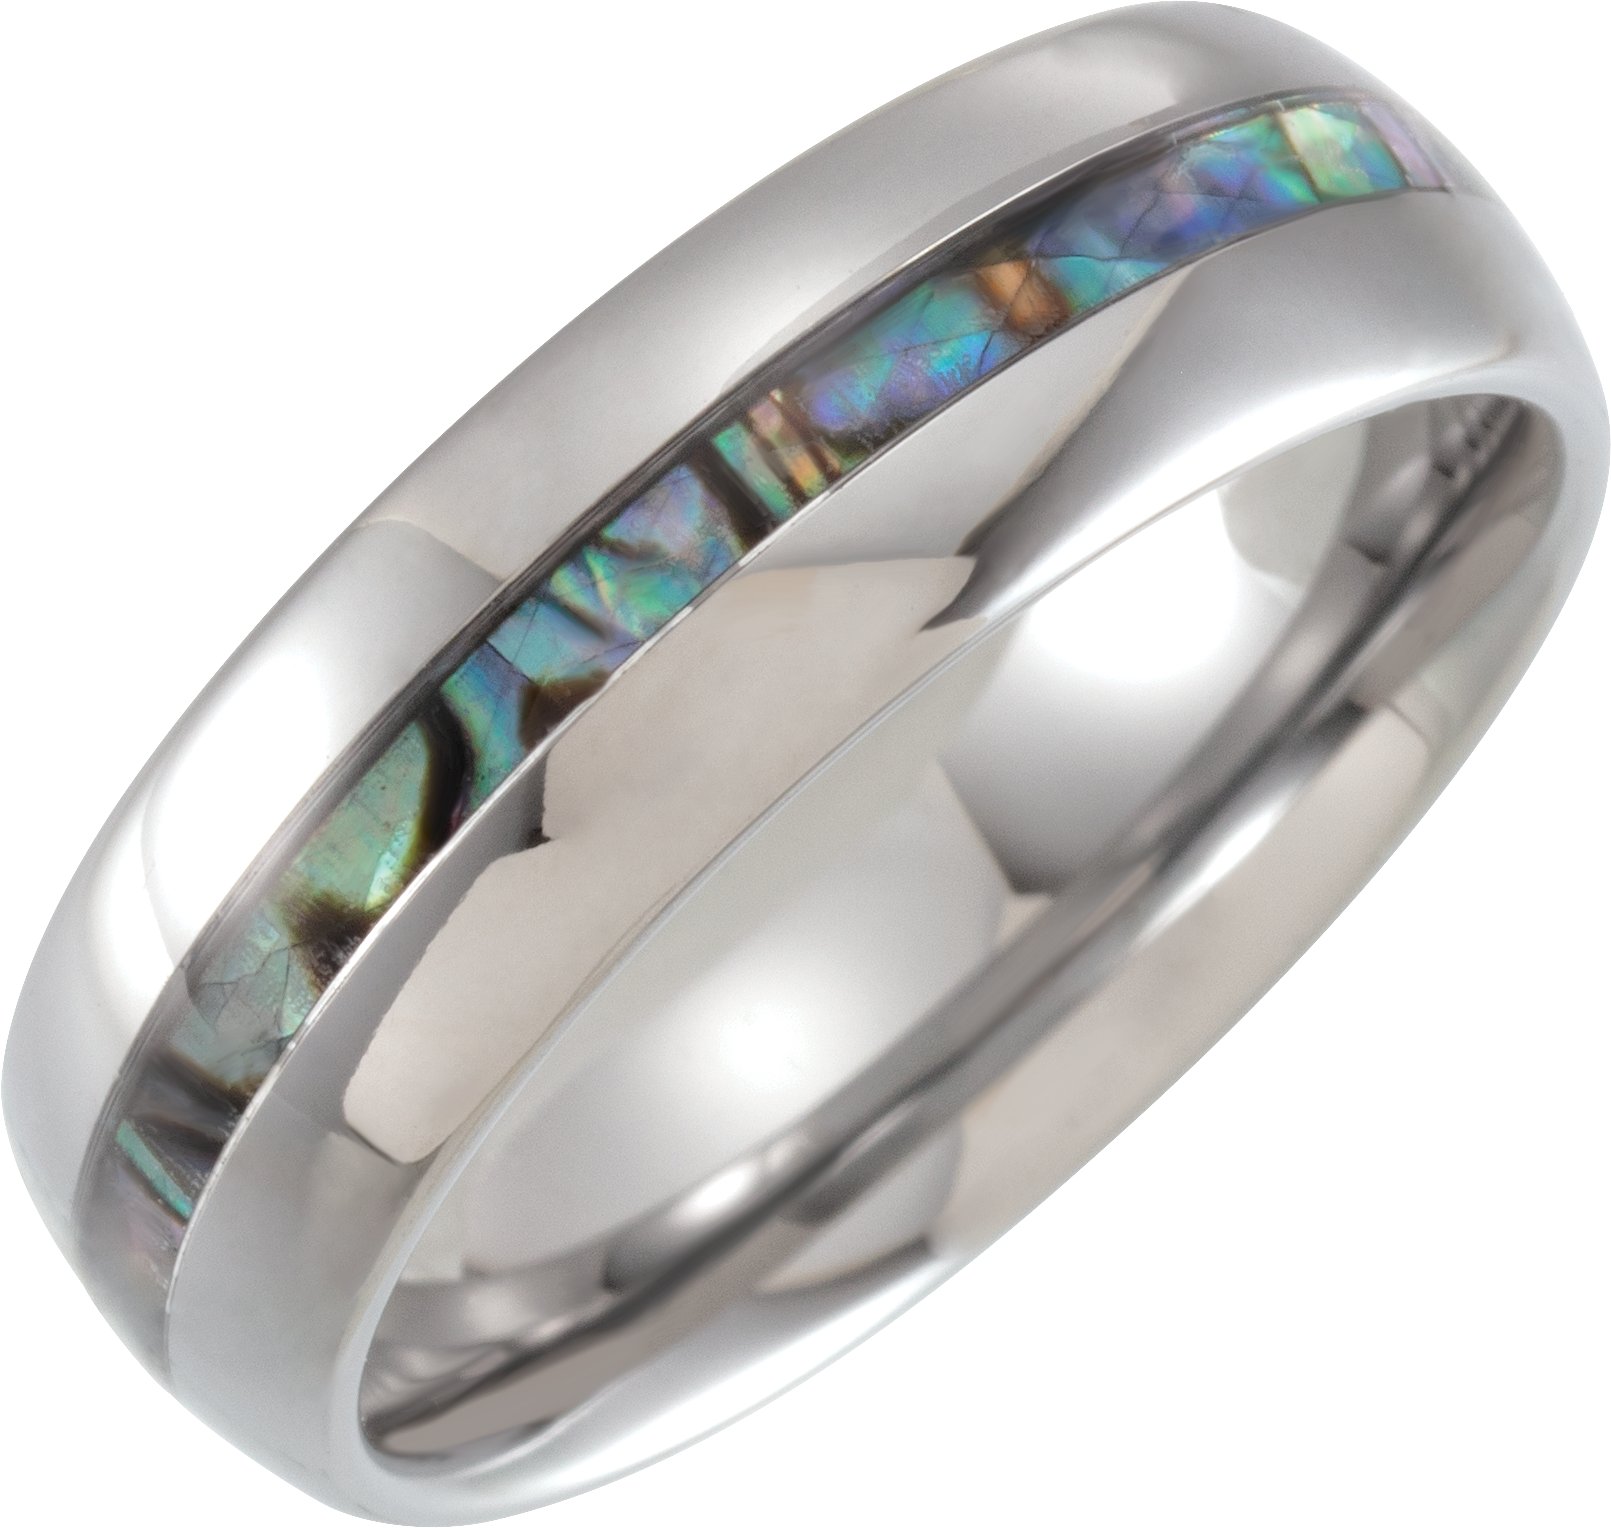 Tungsten 8 mm Half Round Band with Pearl Shell Inlay Size 13